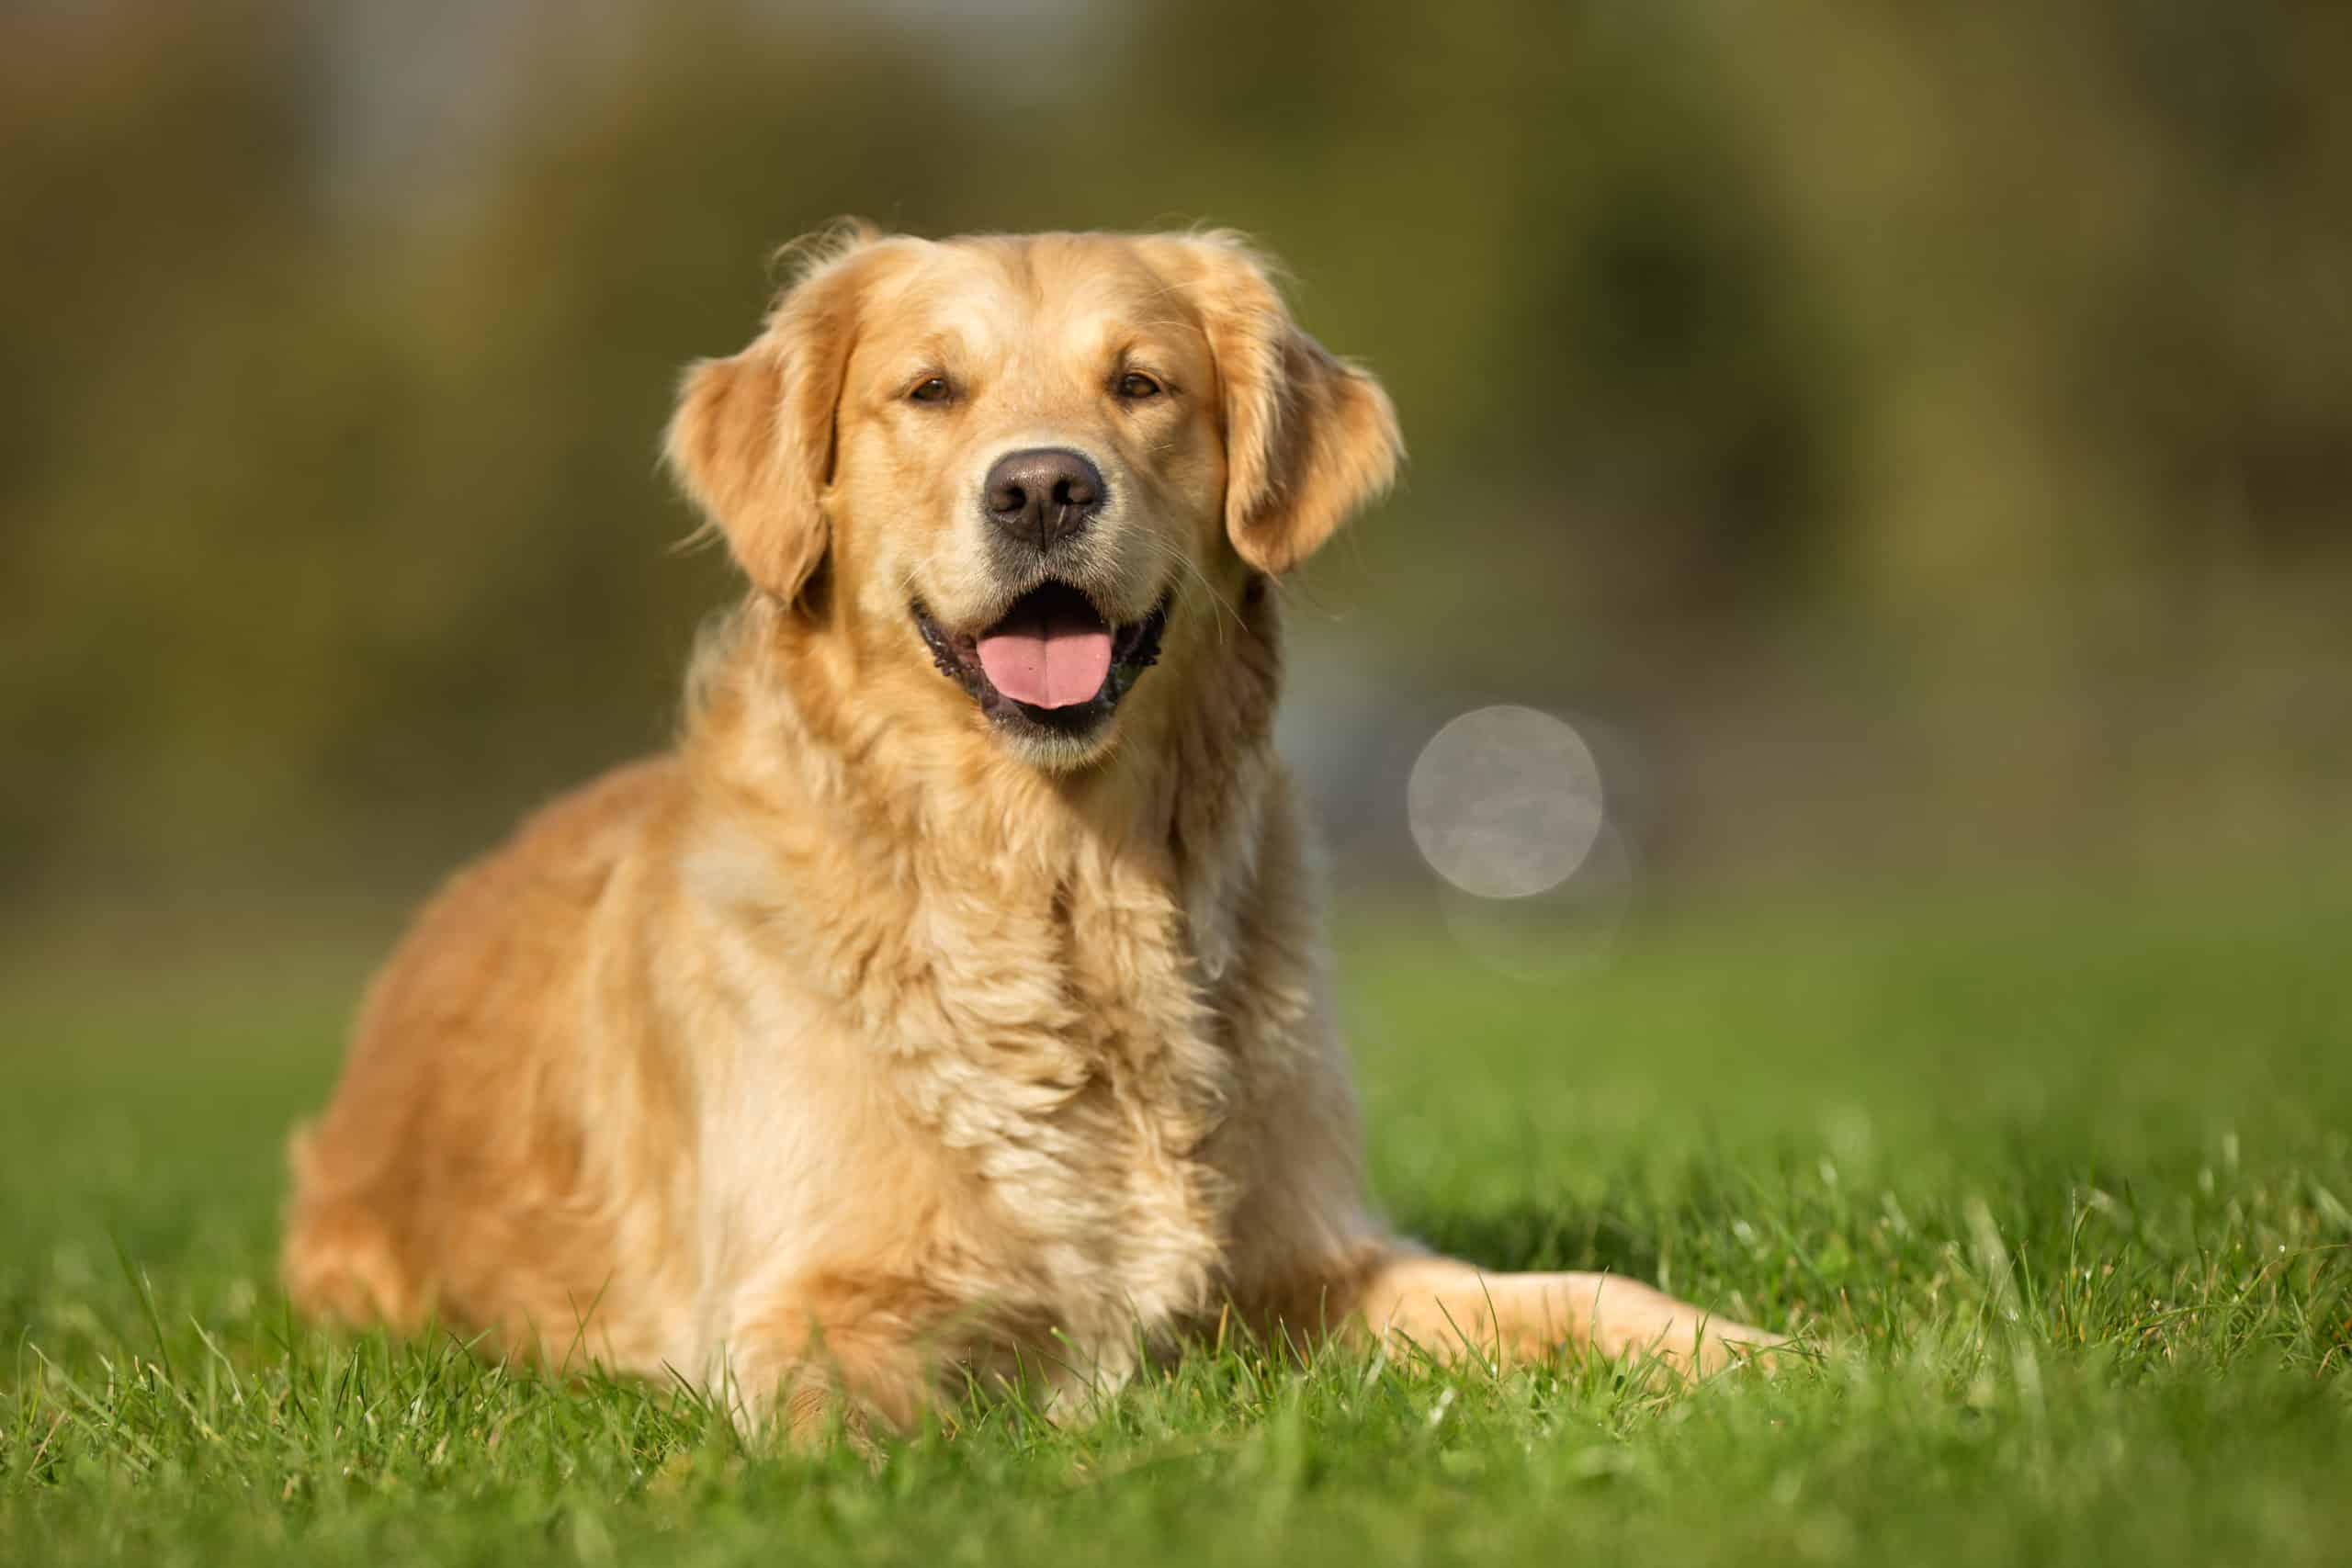 How long do a dog’s nipples stay swollen after heat? (And why dog’s nipples swell after heat)